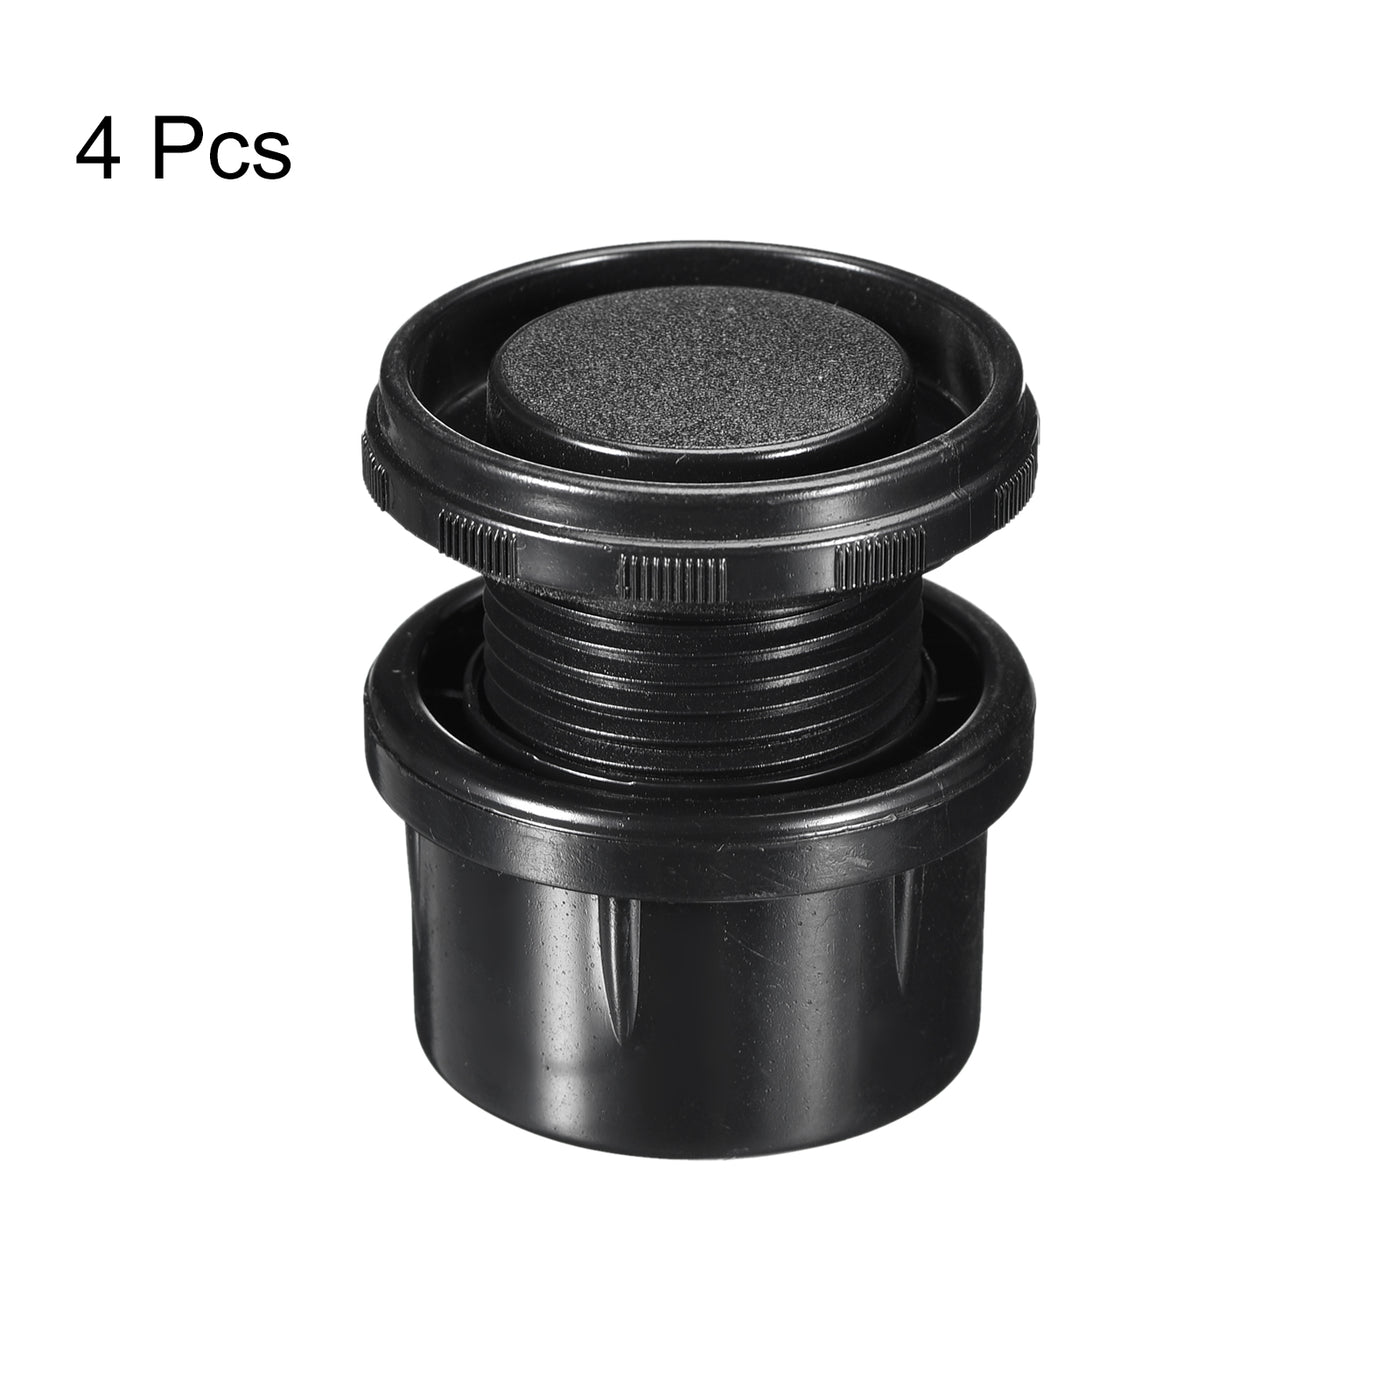 uxcell Uxcell 4Pcs Inserts for Round Tubes with Leveling Feet, for 50mm/1.97" Dia Round Tube